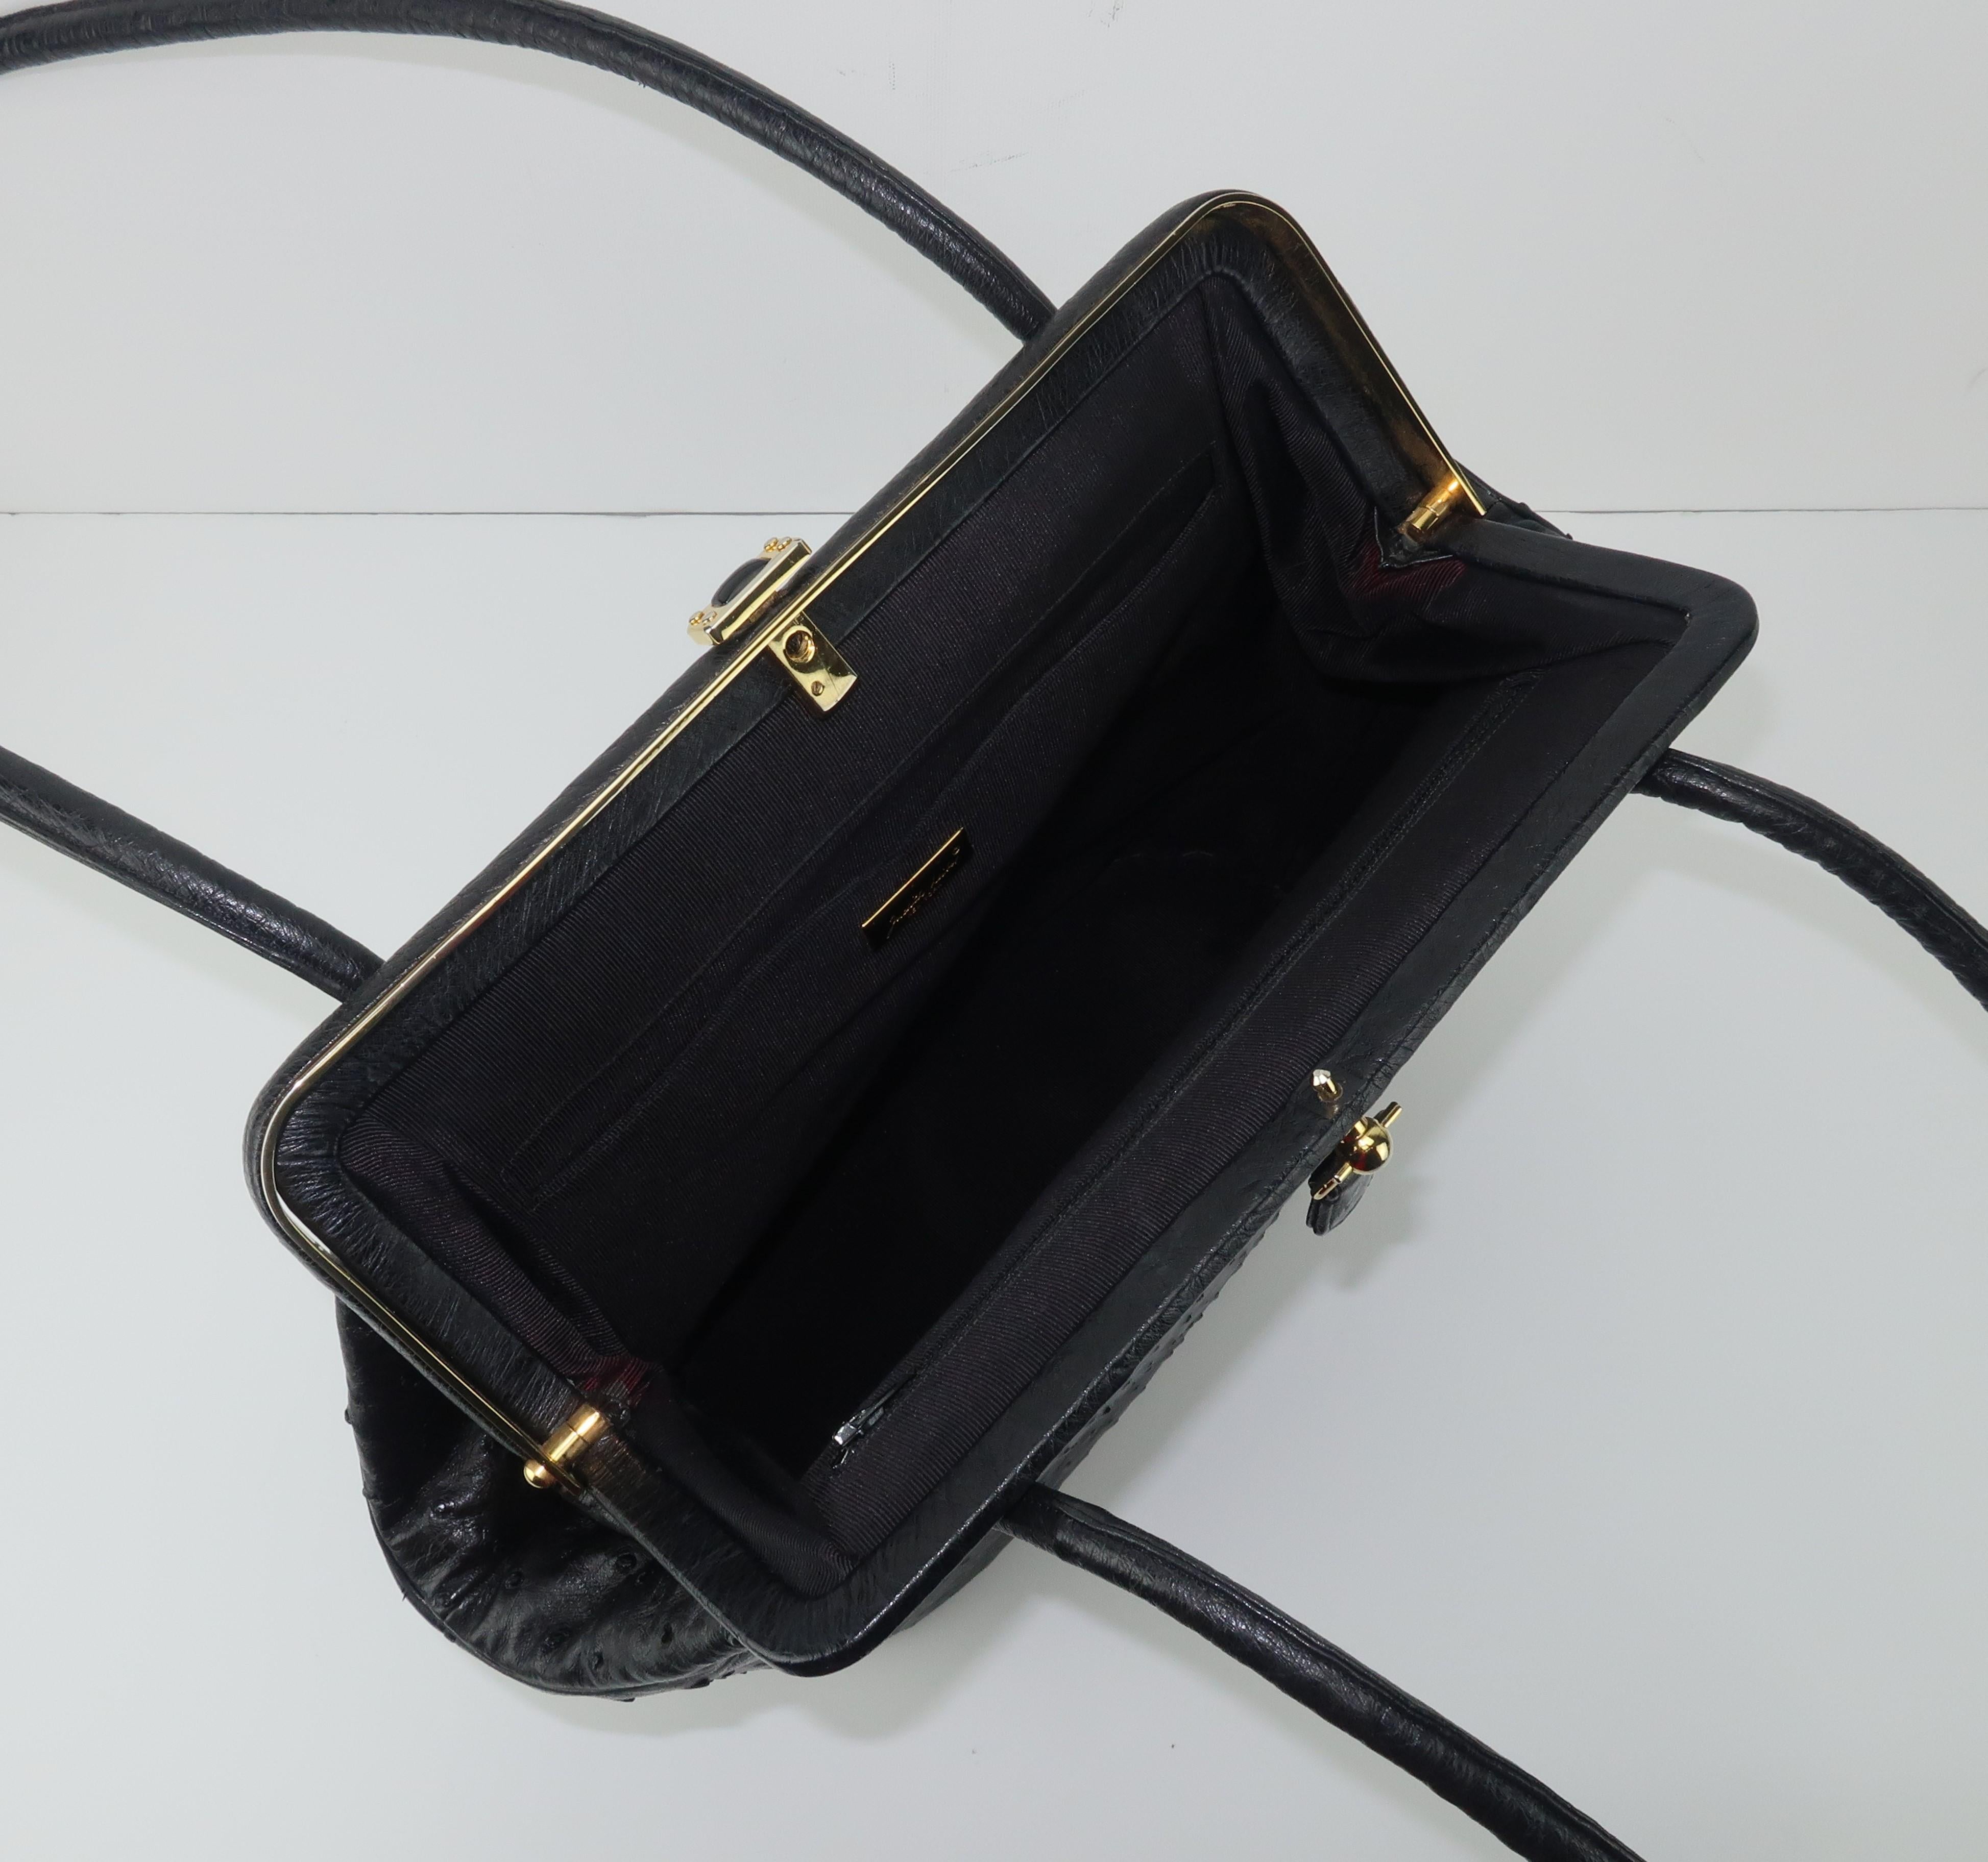 Judith Leiber Large Black Ostrich Leather Handbag With Gold Studs For Sale 4